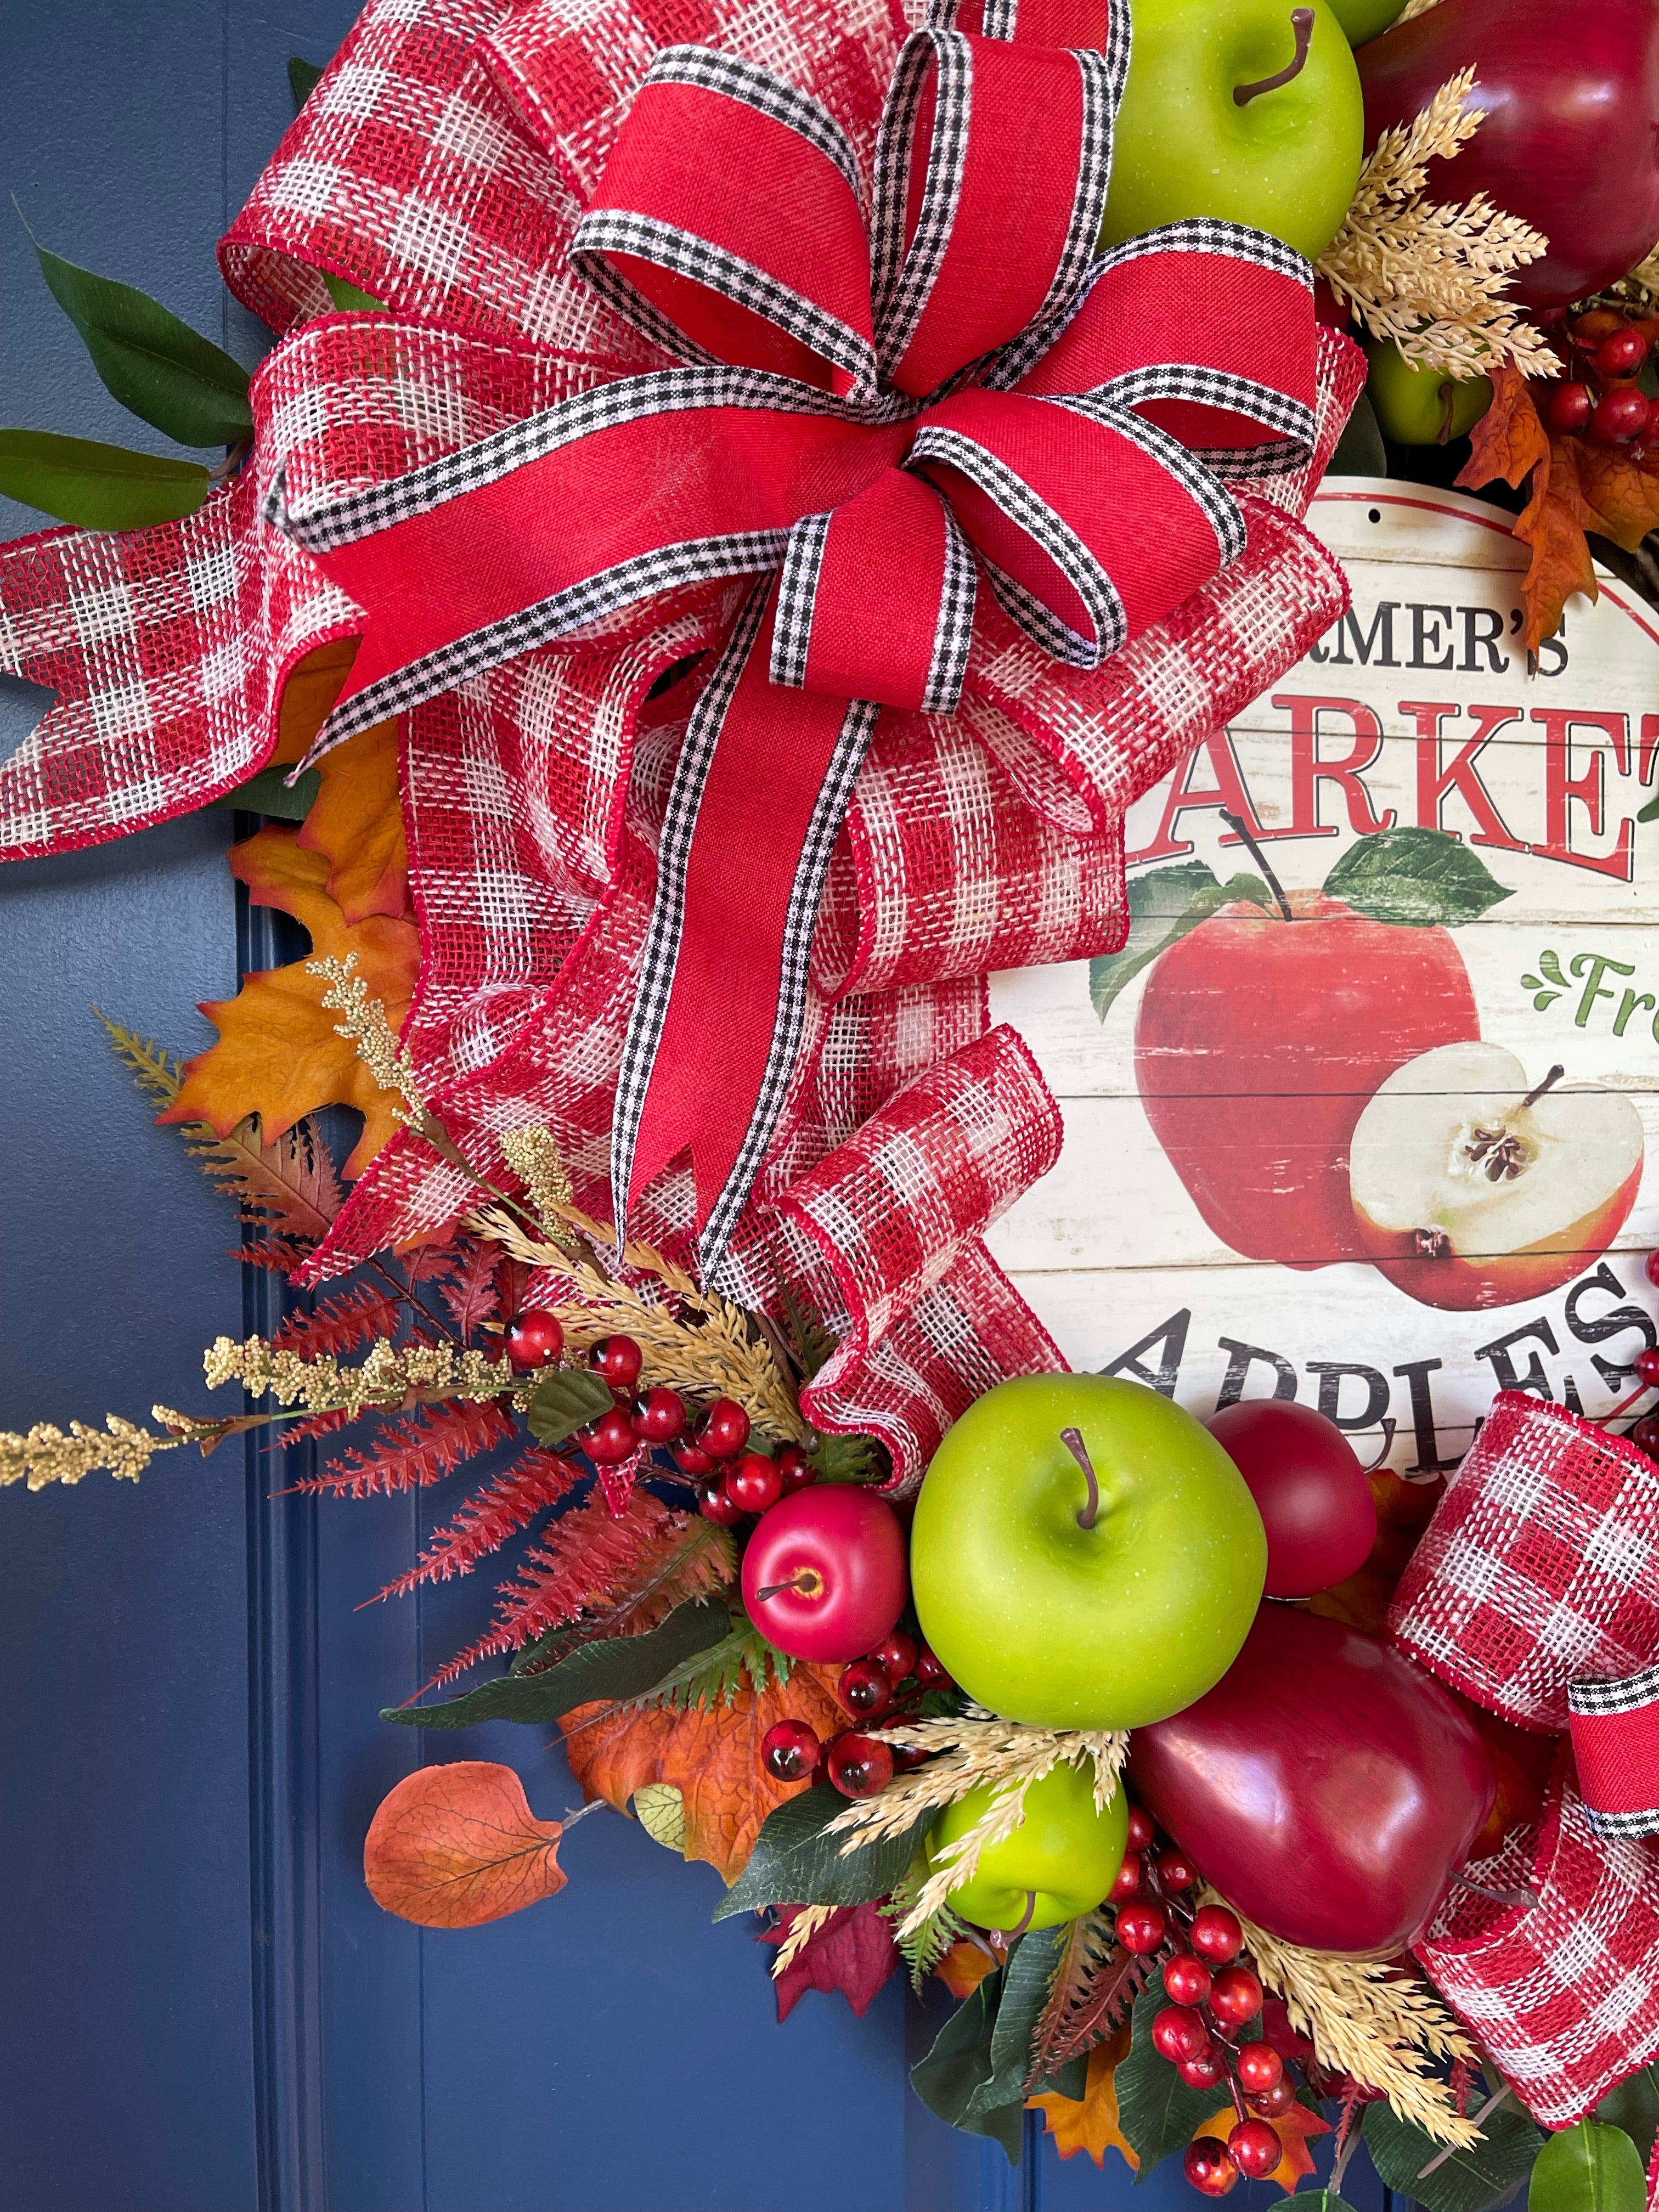 Left Side Lower View of Fall Apple Grapevine Wreath filled with Red and Green Apples, Fall Leaves and Berries, Double Bows of Red, White and Black with a Farmers Market Fresh Apples Sign in the Center. 